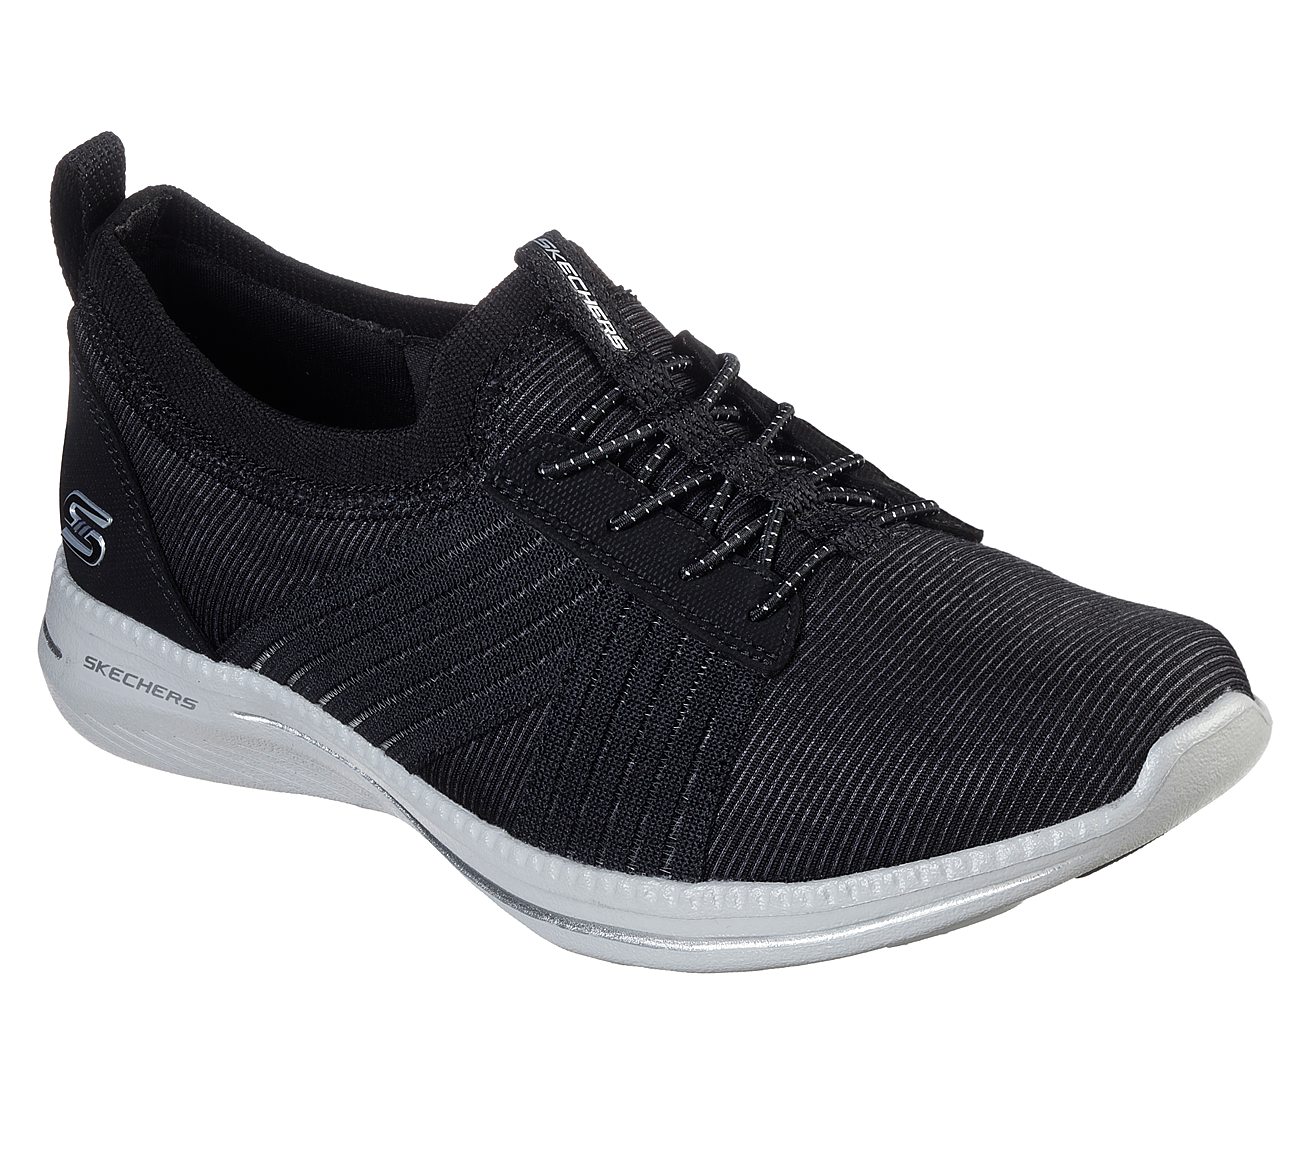 CITY PRO - EASY MOVING, BBBBLACK Footwear Right View